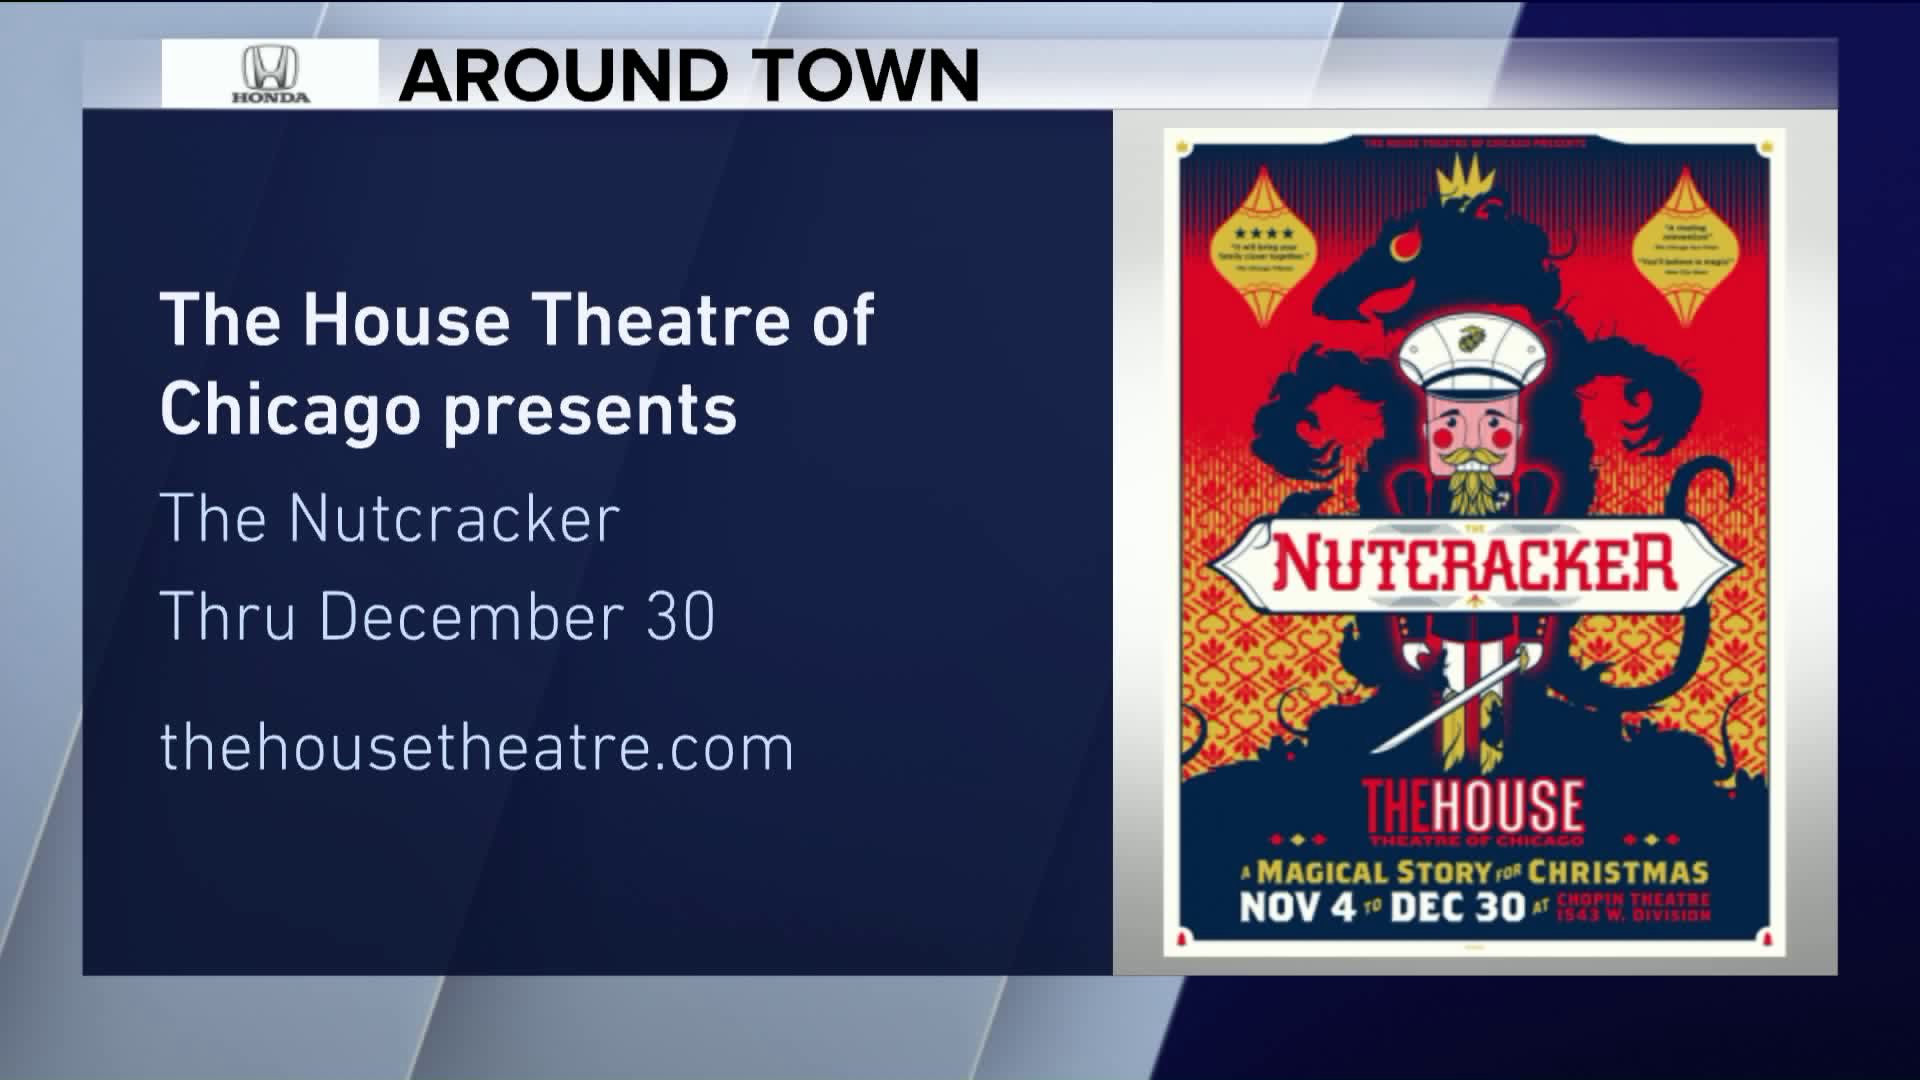 Around Town checks out a ‘different’ version of the Nutcracker